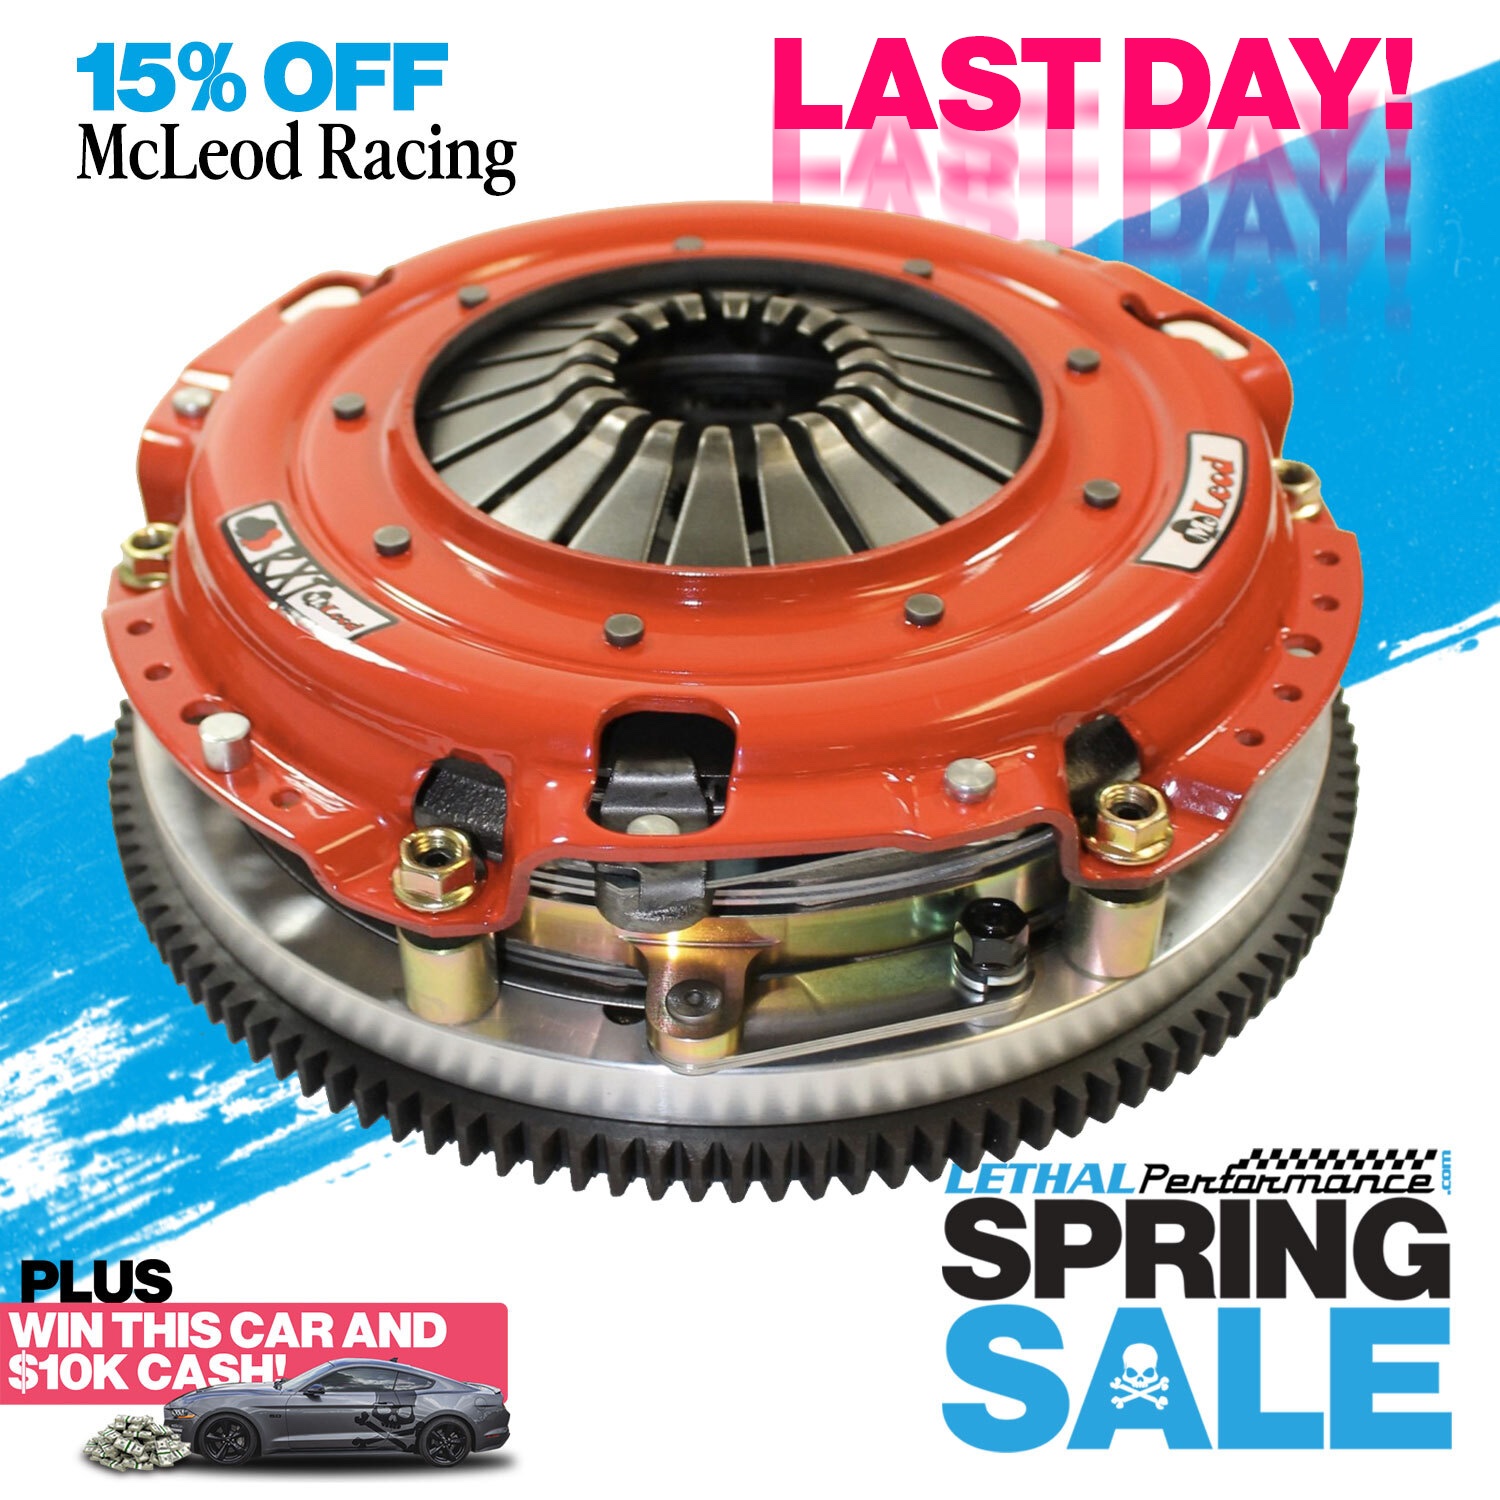 S650 Mustang Spring SALE has SPRUNG here at Lethal Performance!! mcloed last day spring sale